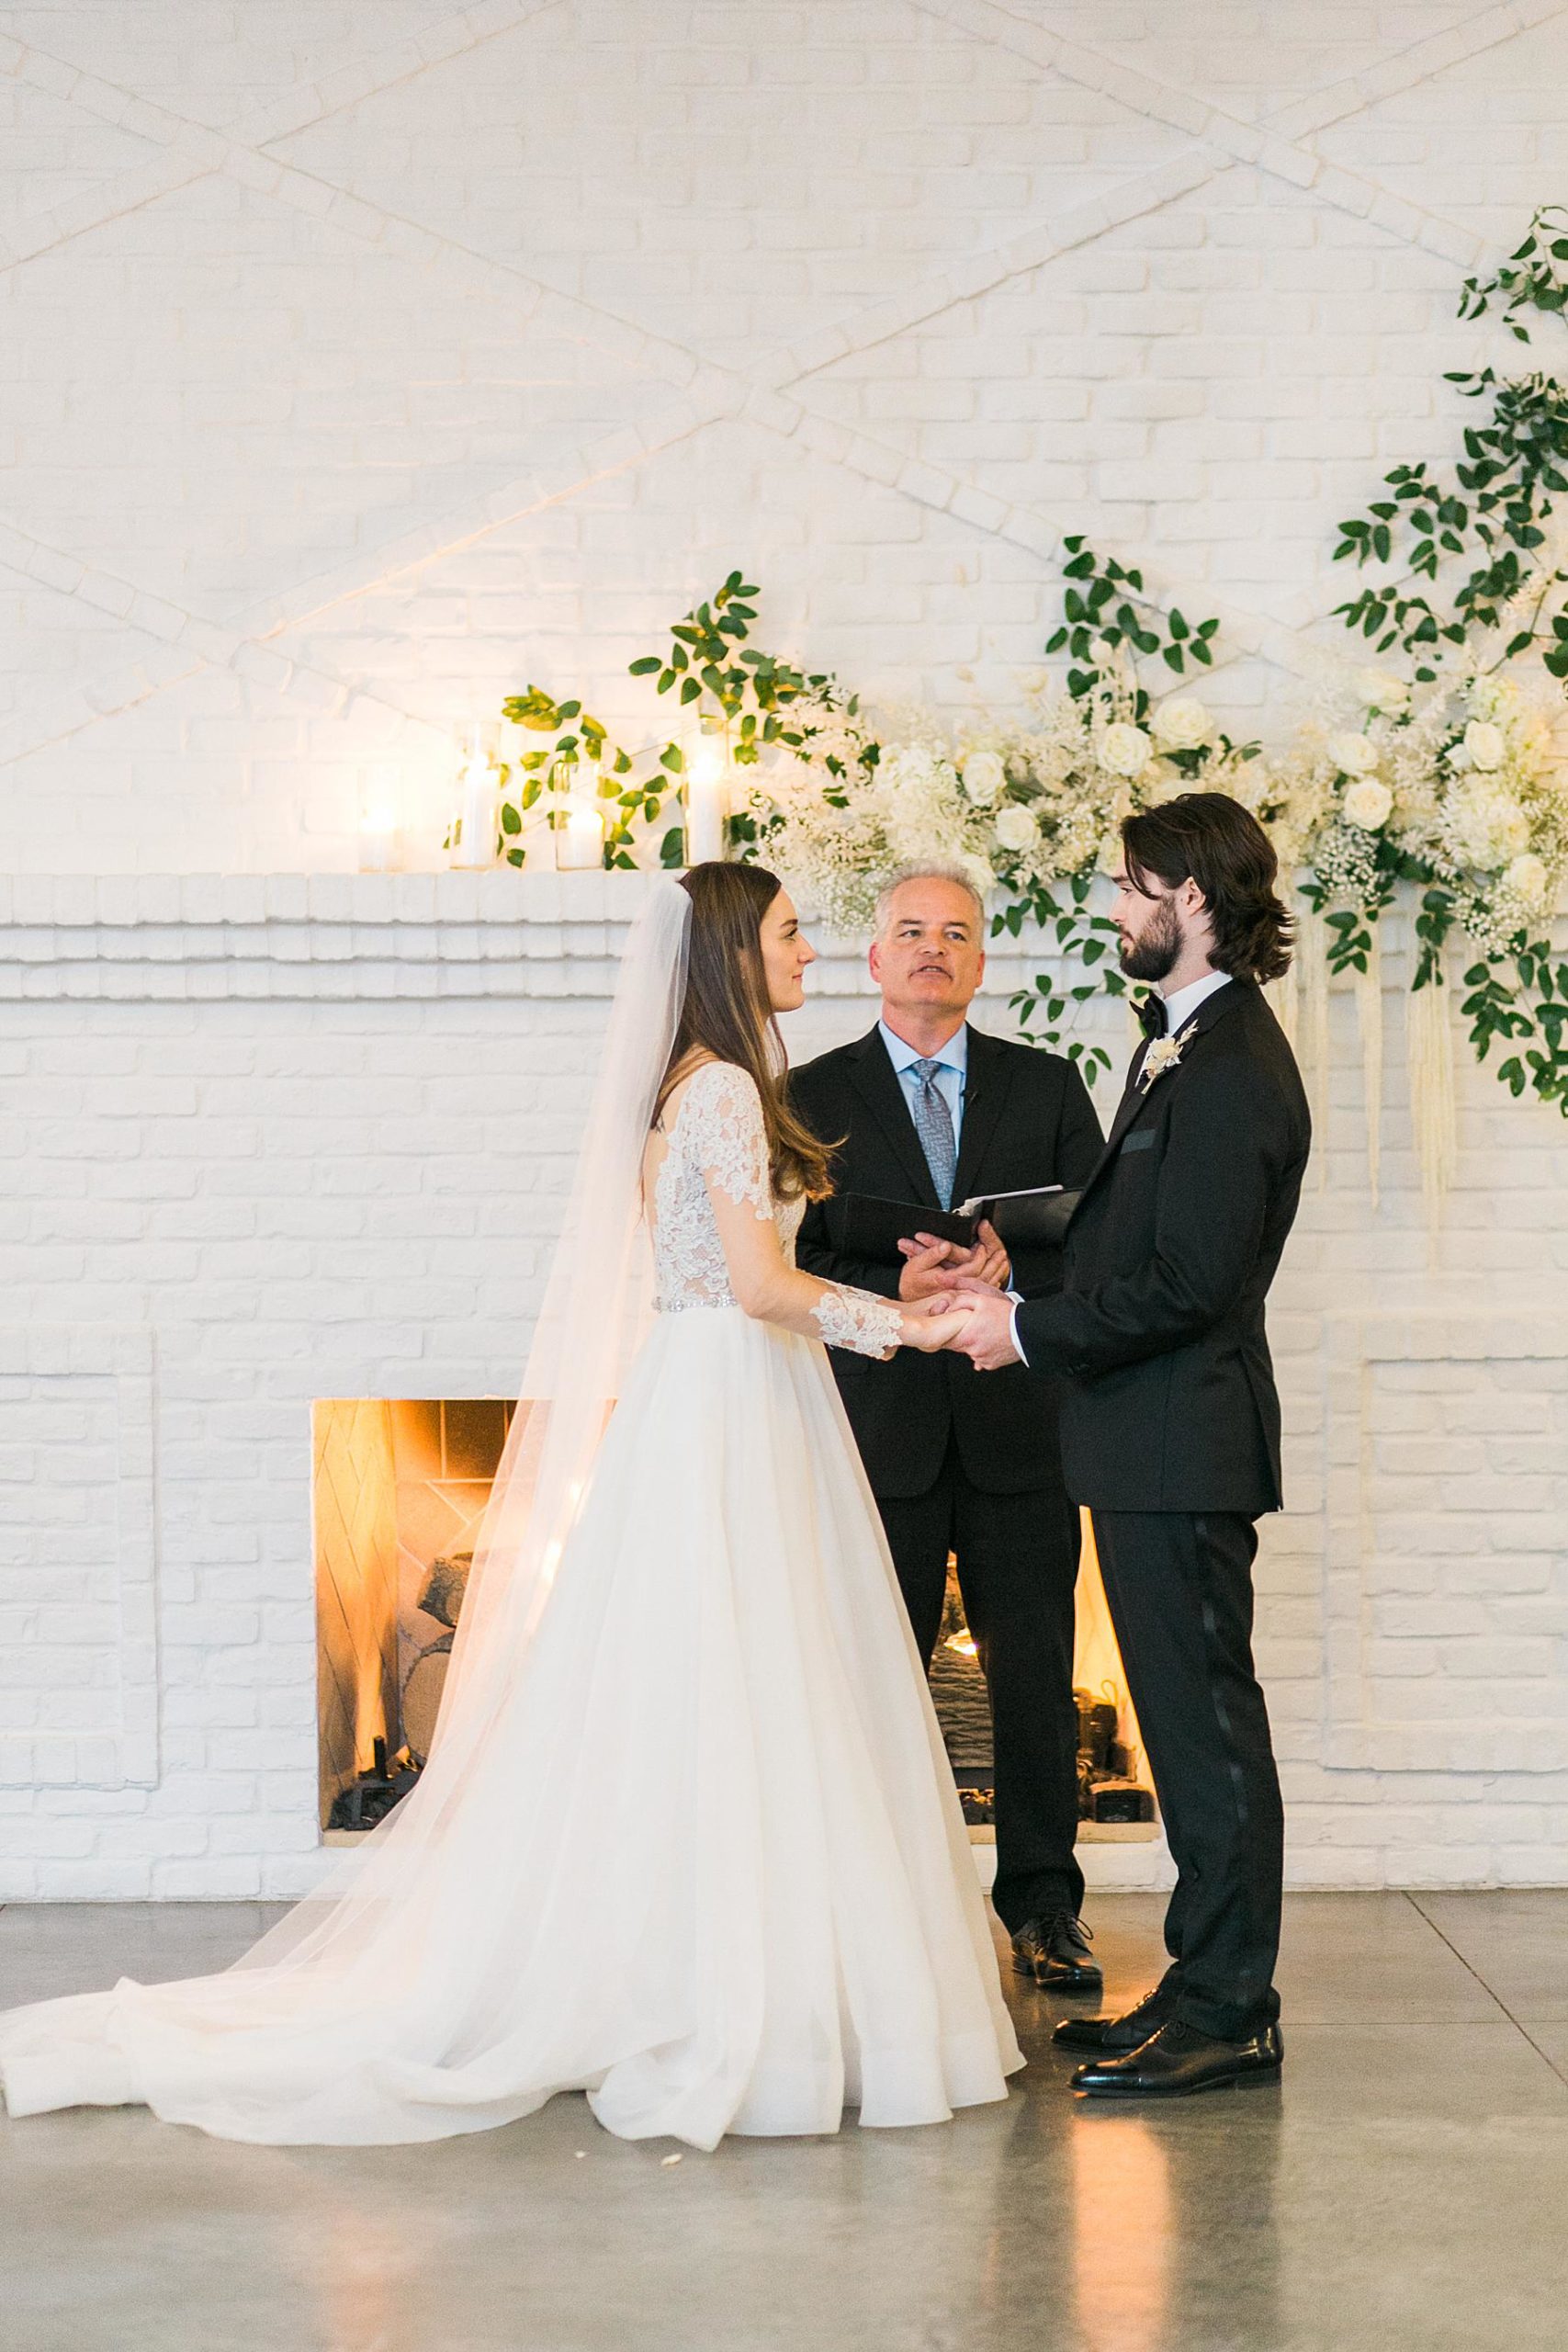 wedding ceremony in front of white fireplace at hutton house wedding venue in minneapolis minnesota